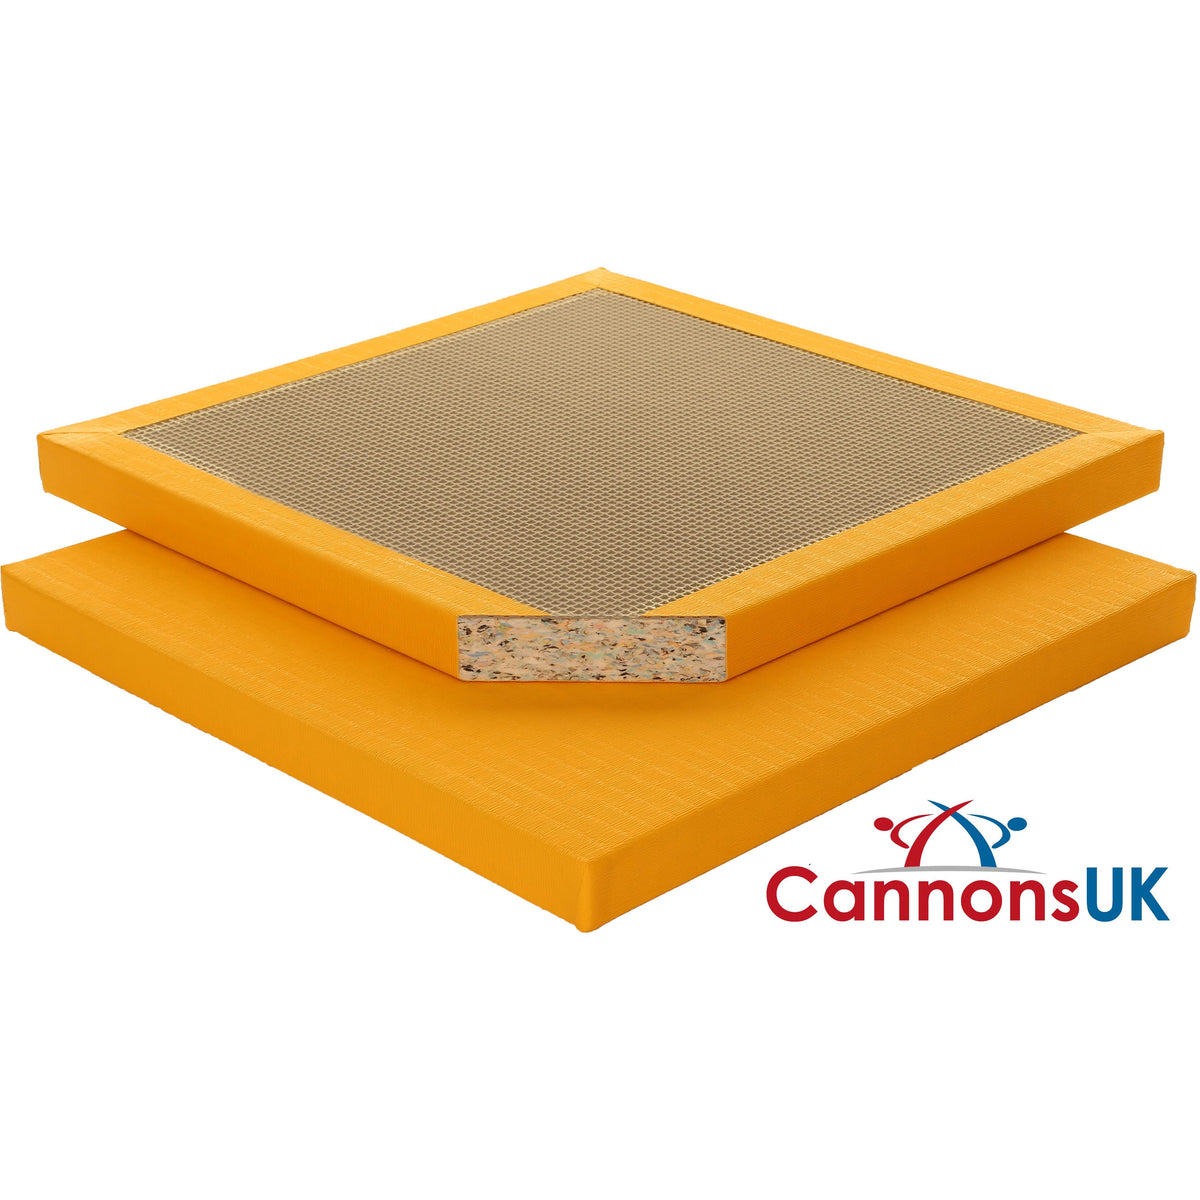 Cannons UK Contest Judo Mats 1m x 2m x 40mm - Cannons UK